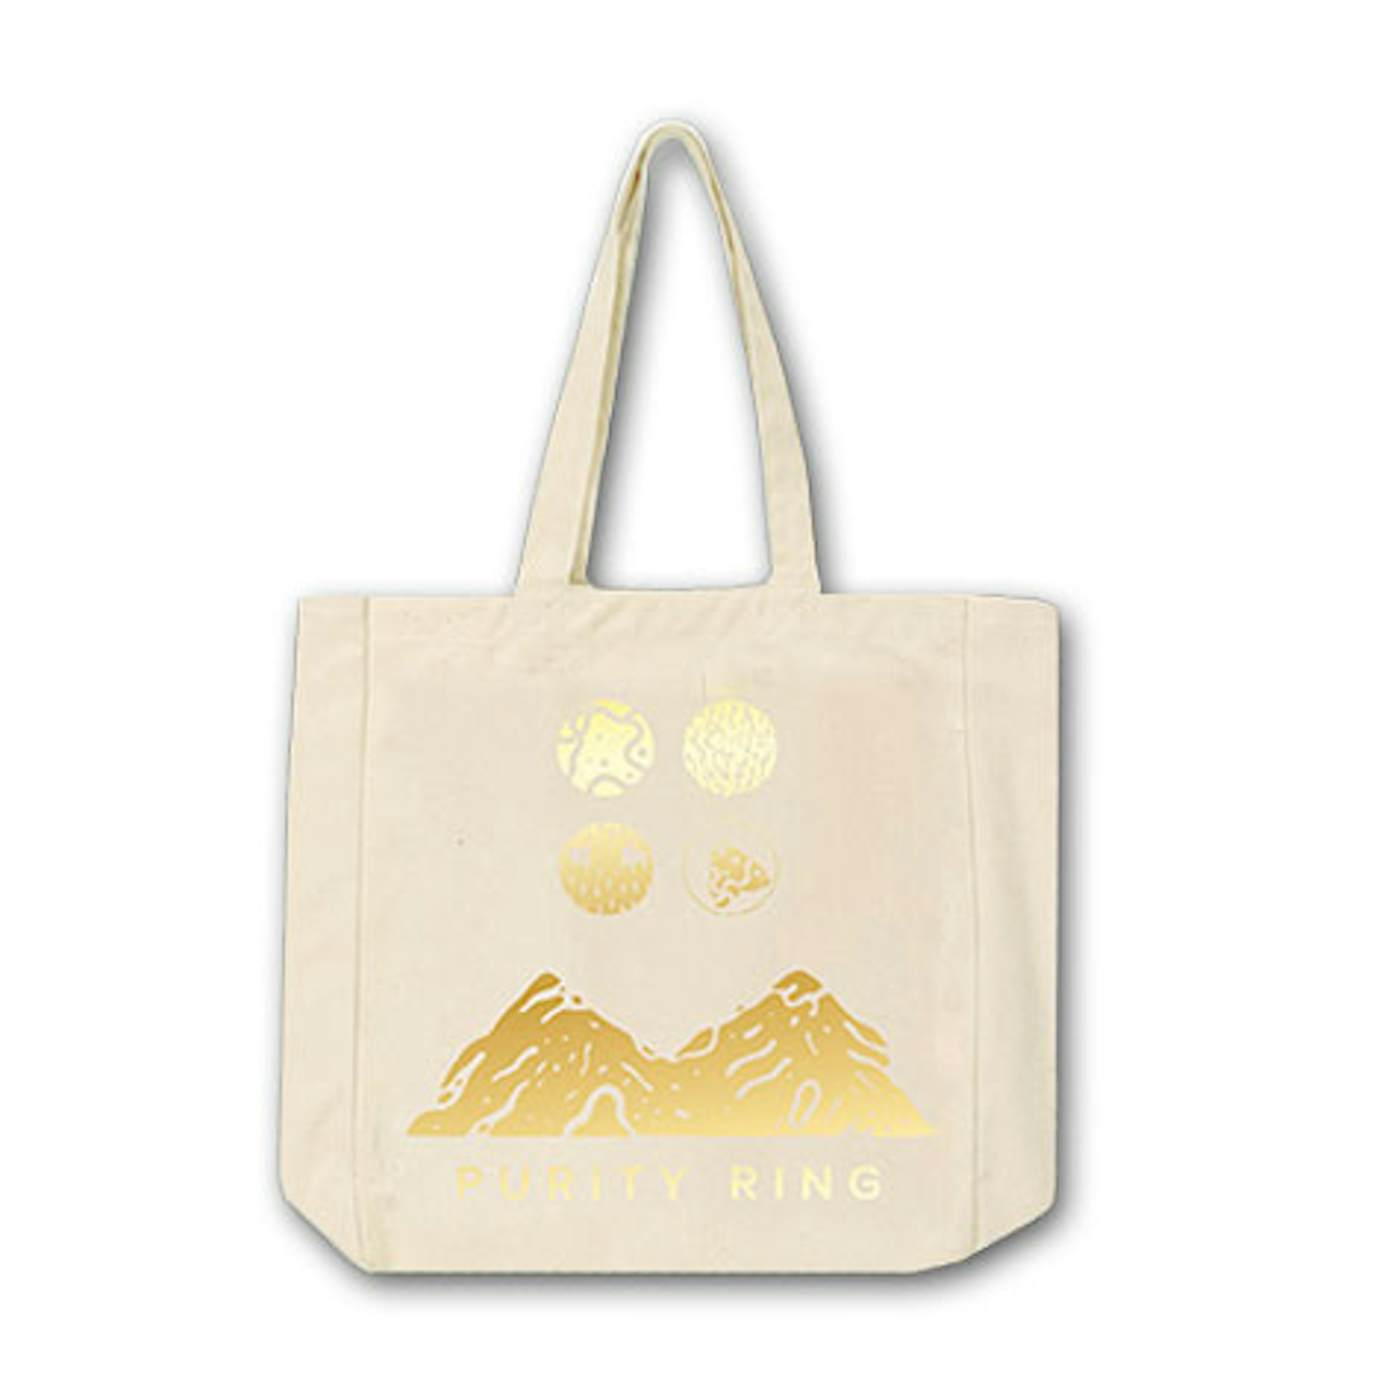 Purity Ring Purity Gold Foil Symbols Tote Bag